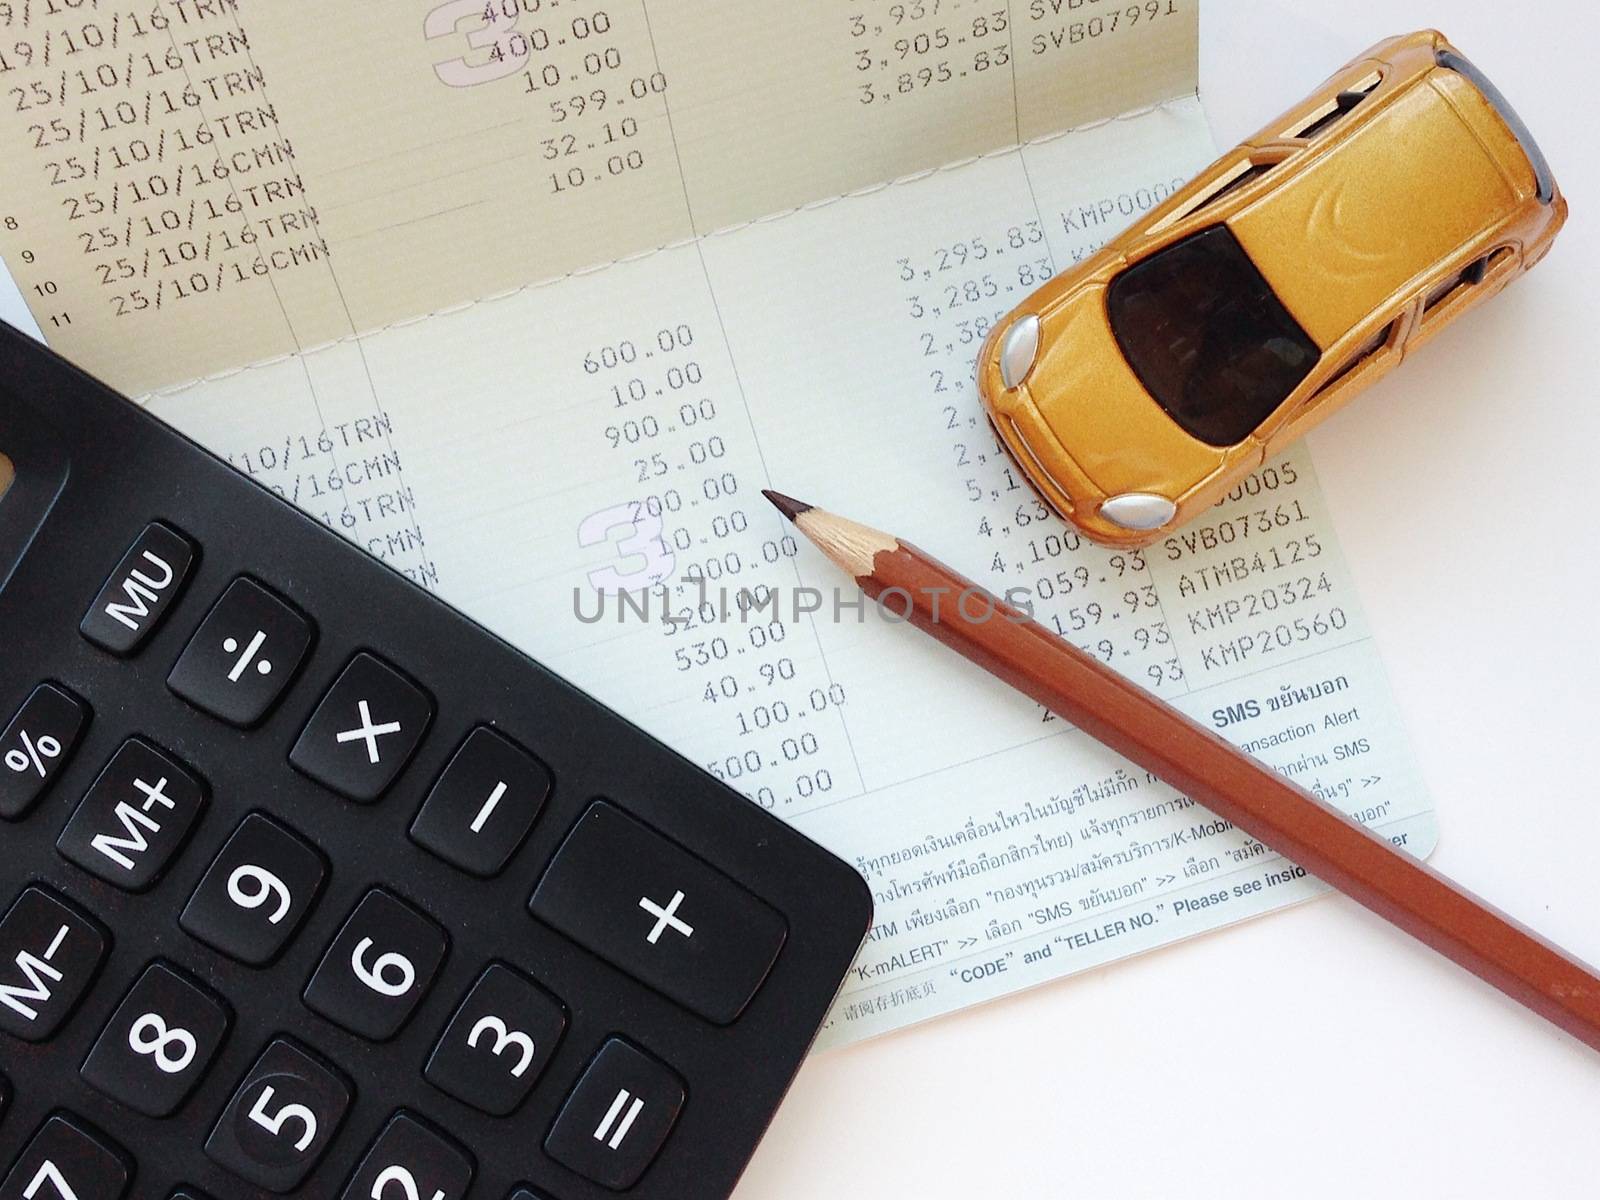 Business, finance, saving money, banking or car loan concept : Miniature car model, calculator and saving account book or financial statement on office table